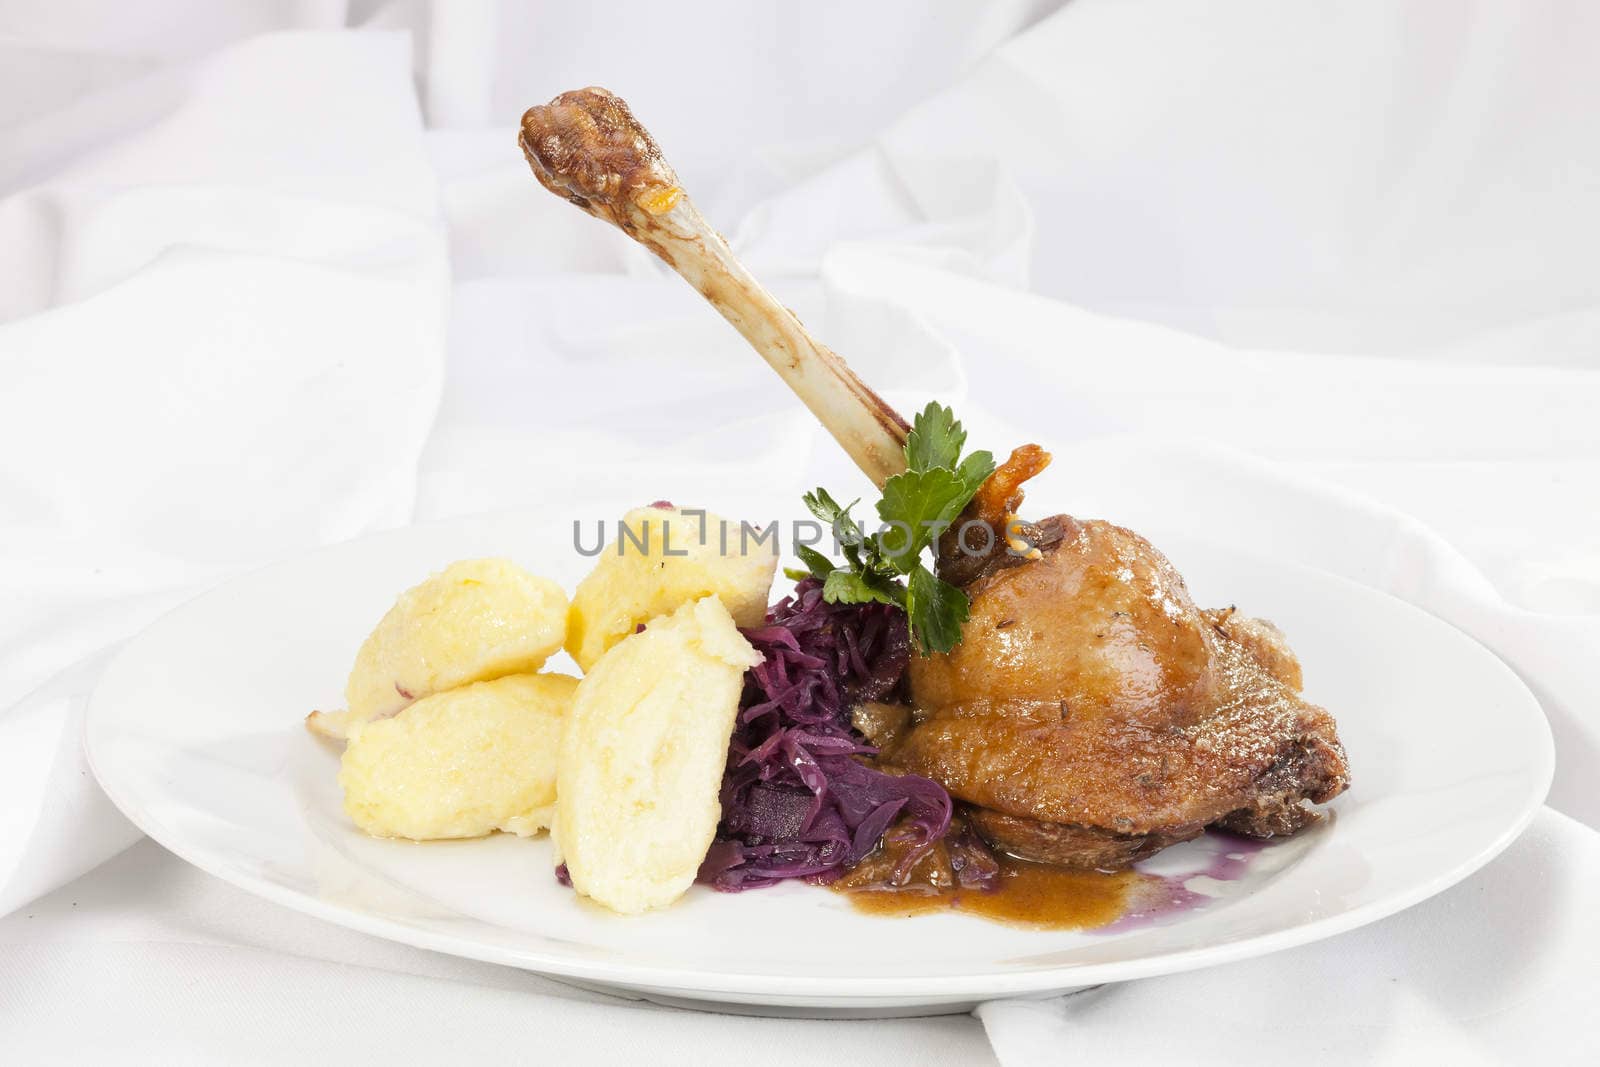 Baked duck leg with potato dumplings and red cabbage